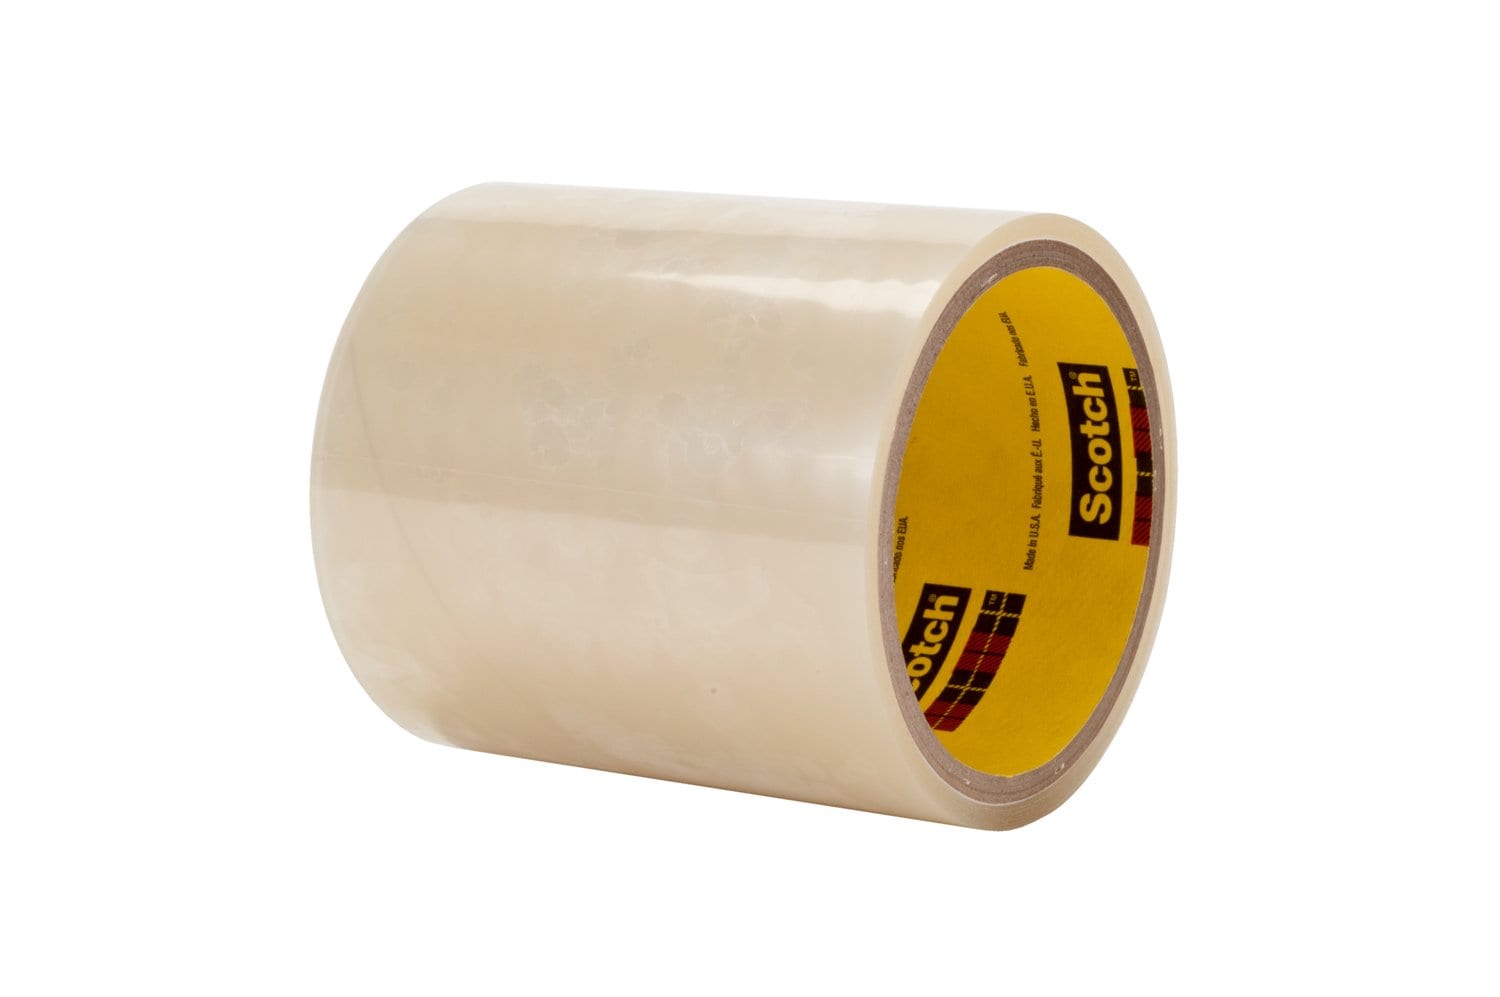 7010334045 - 3M Adhesive Transfer Tape 467MP, Clear, 3/4 in x 60 yd, 2 mil, 48 rolls
per case